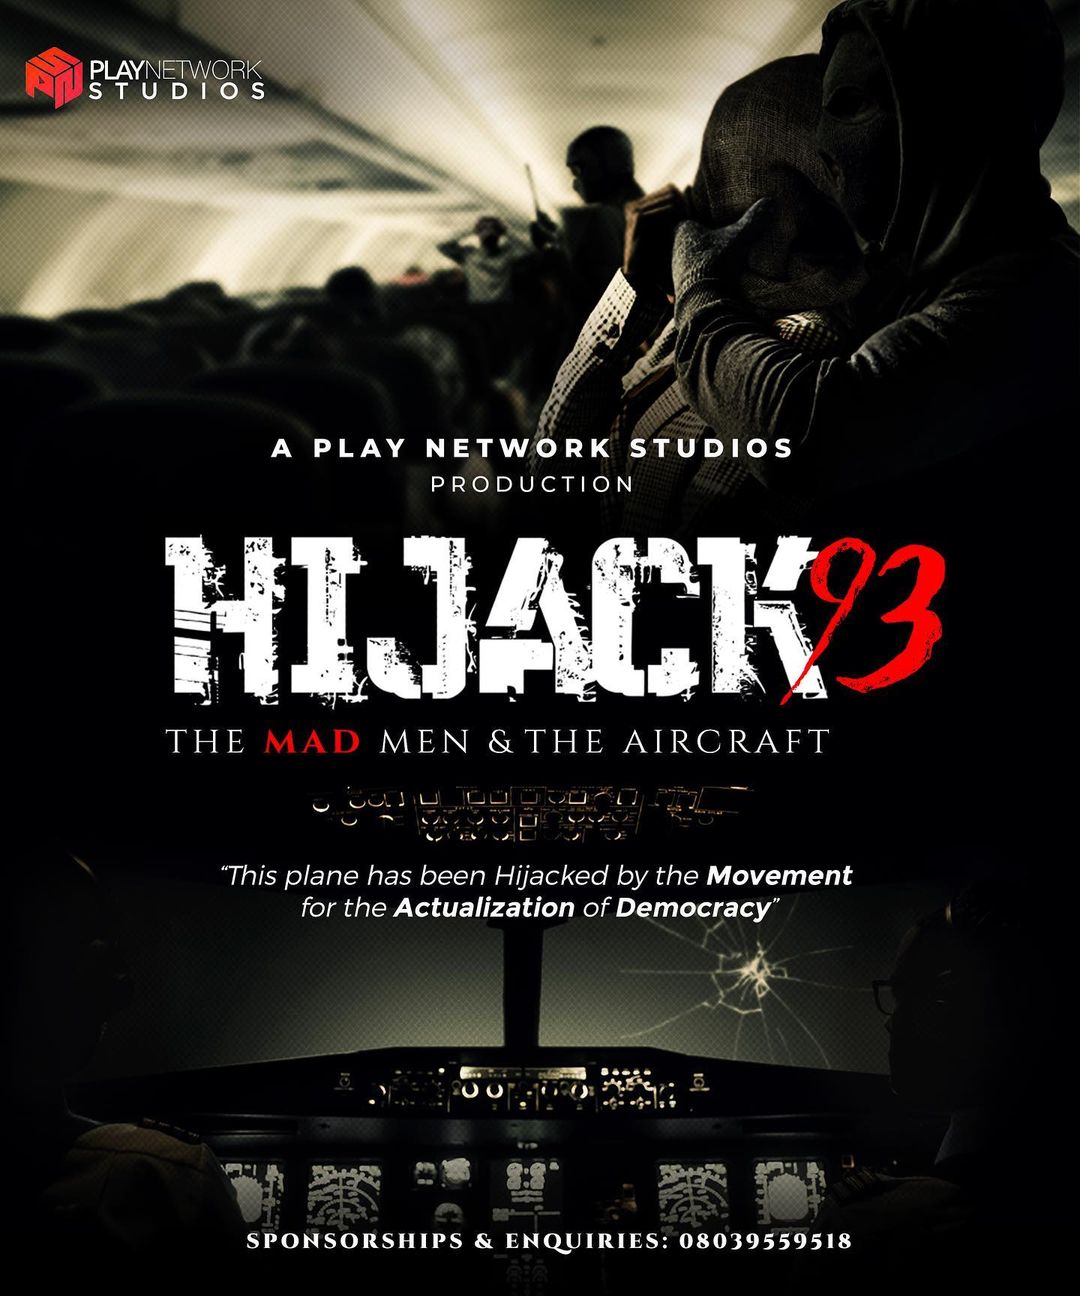 Rogers Ofime & Agozie Ugwu Set To Produce Play Network Studios’ Upcoming Project “Hijack 93”